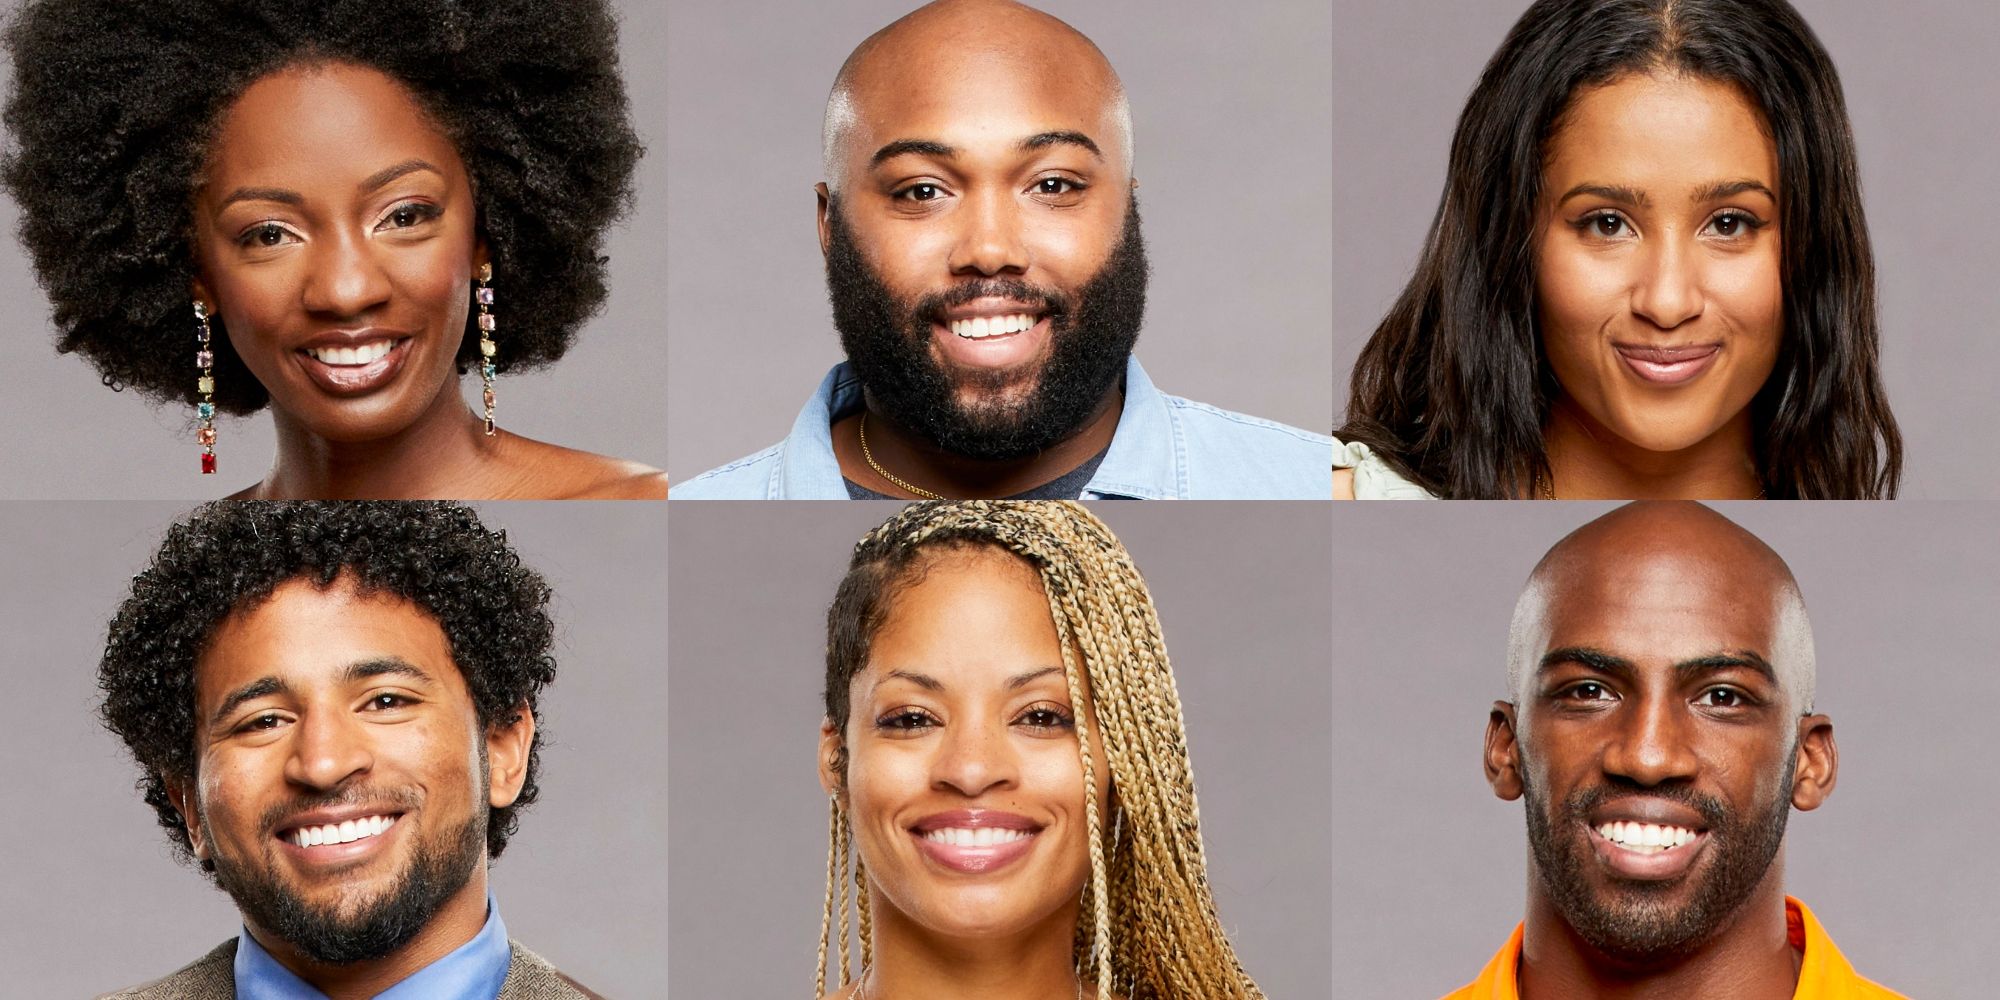 Azah Awasum, Derek Frazier, Hannah Chaddha, Kyland Young, Tiffany Mitchell, and Xavier Prather on Big Brother 23 as the Final 6